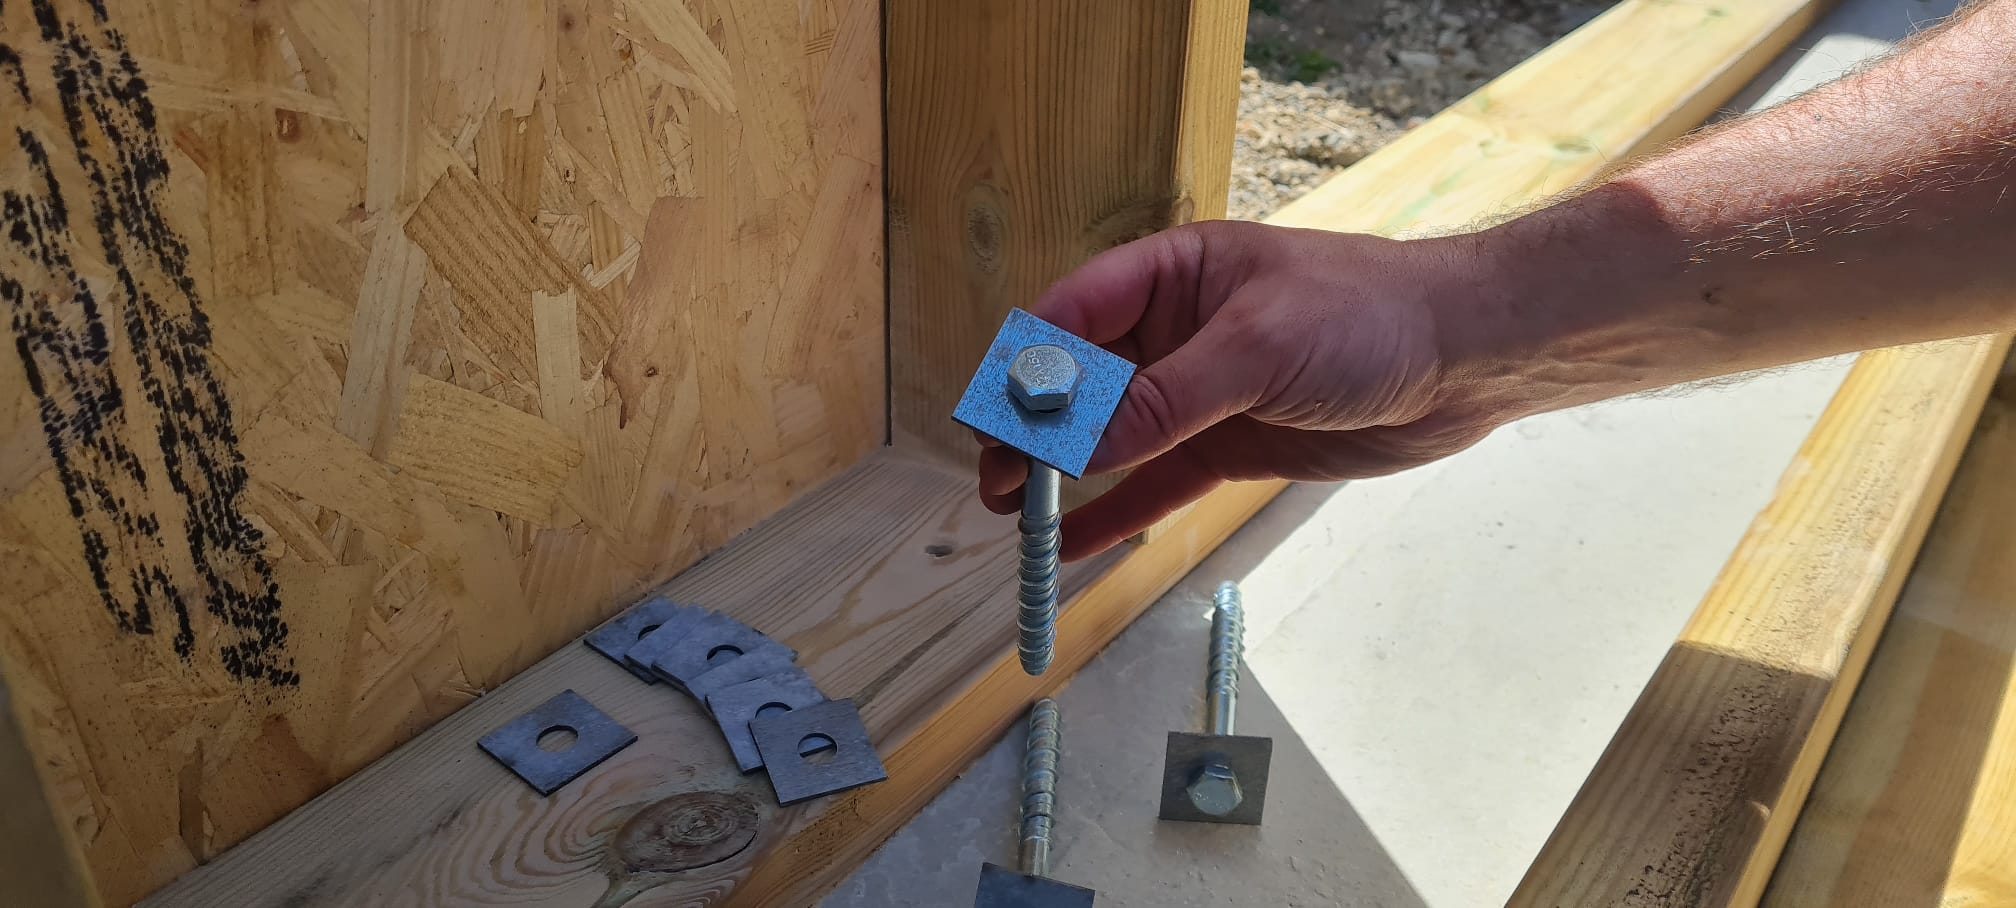 Man Holding Square Washer and Bolt